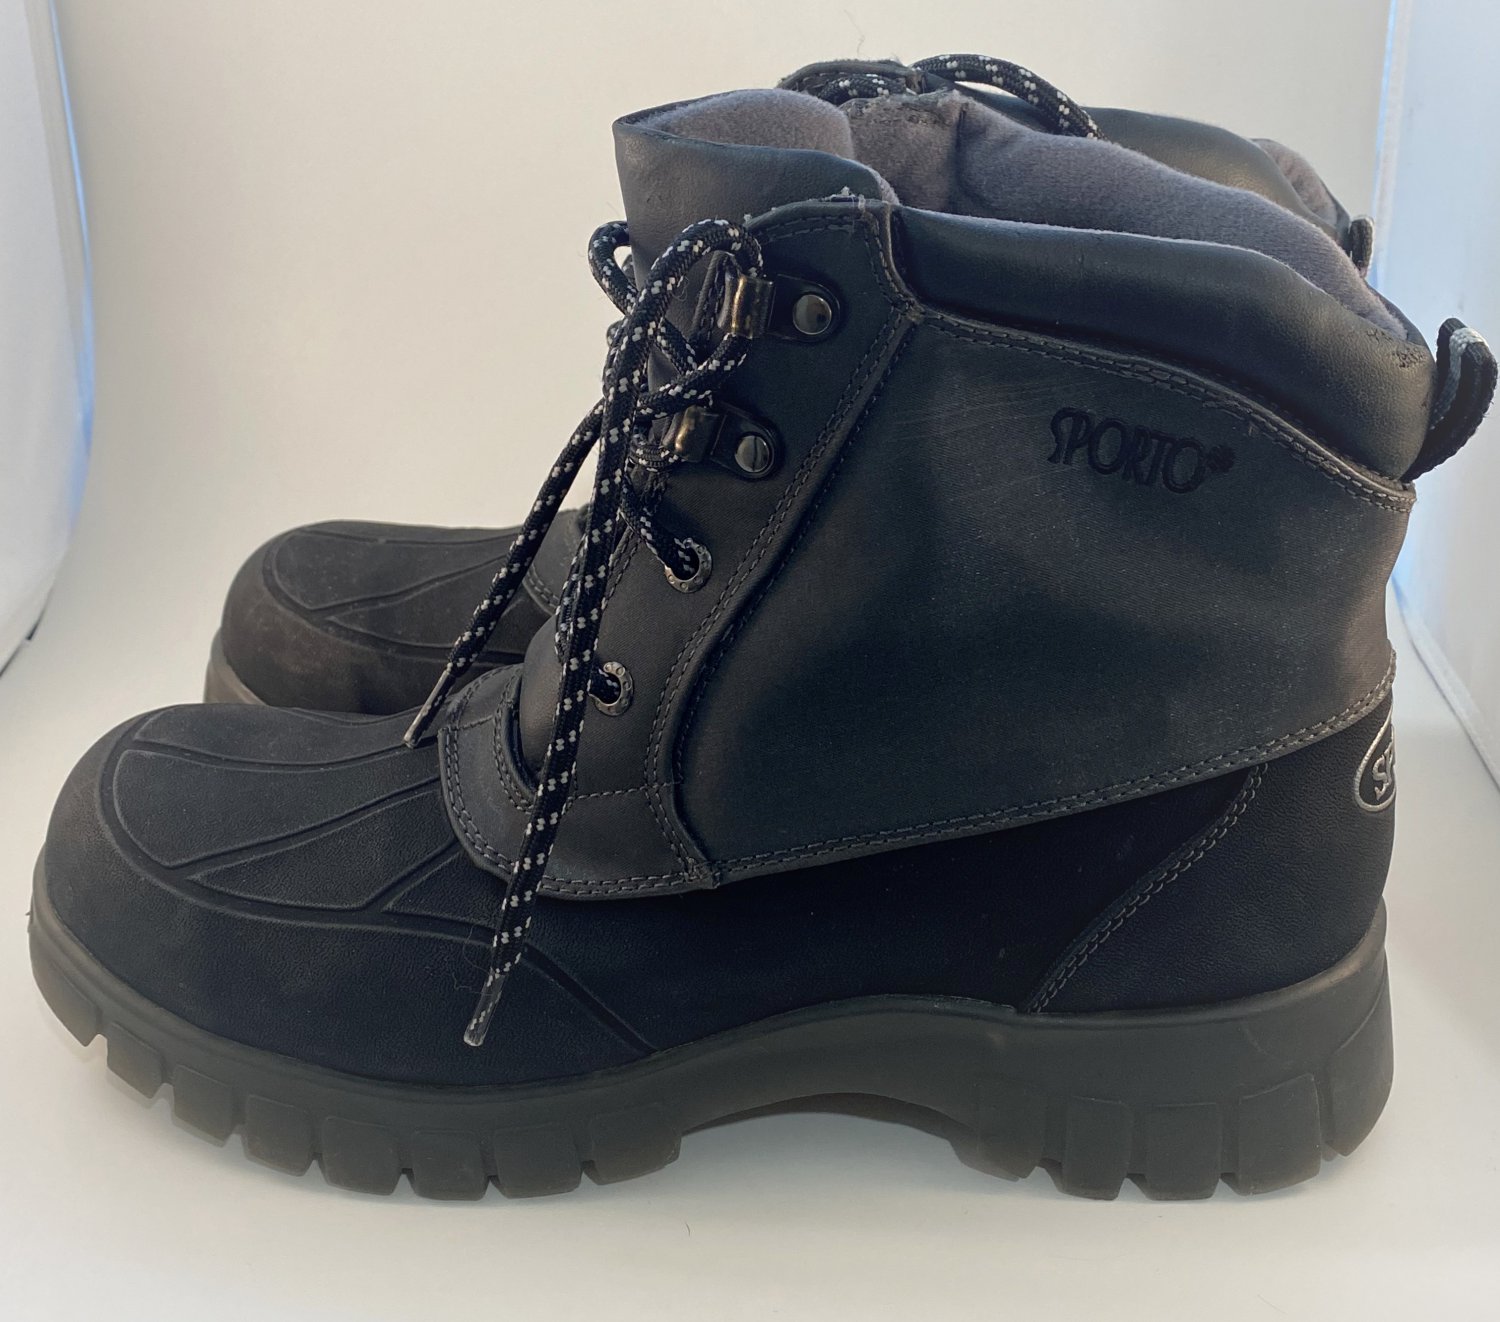 Ladies Sporto Size 10 Black & Grey Insulated Boots